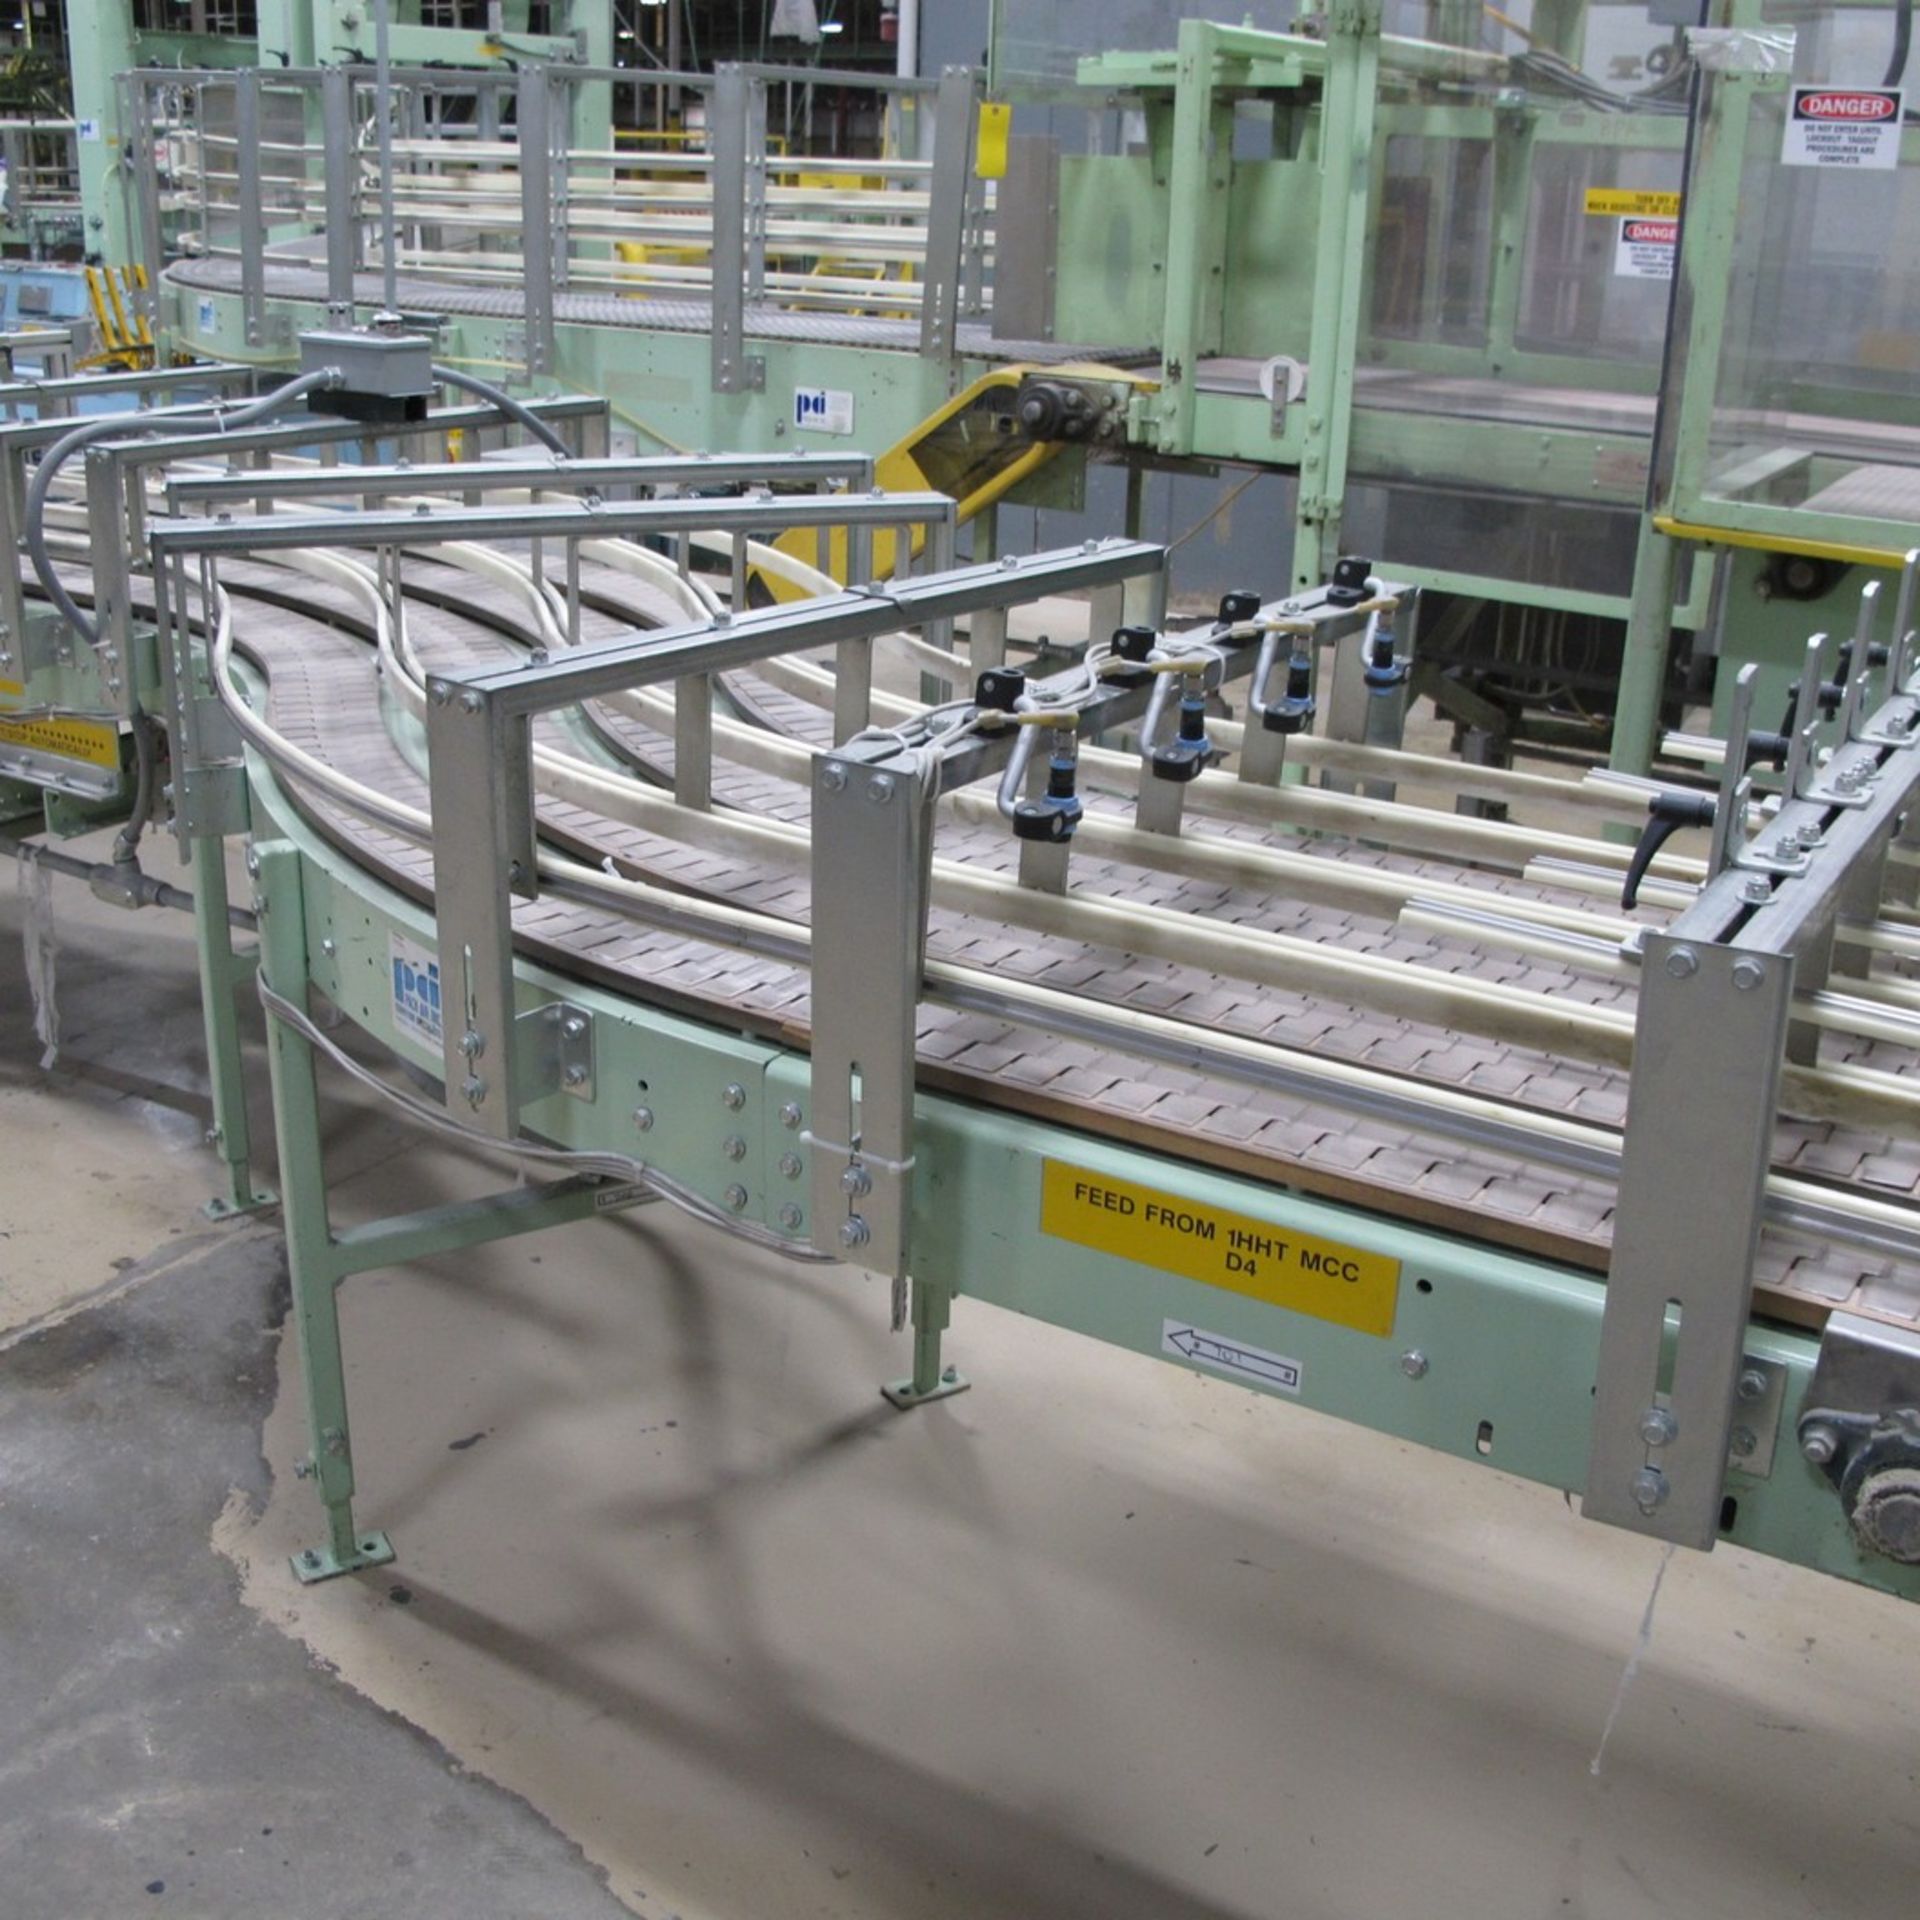 PACK AIR ASSEMBLY INC. APPROX. 10'L X 28"W 4-LANE POWERED BELT CONVEYOR, 4-1/2"W BELTS W/ - Image 2 of 2